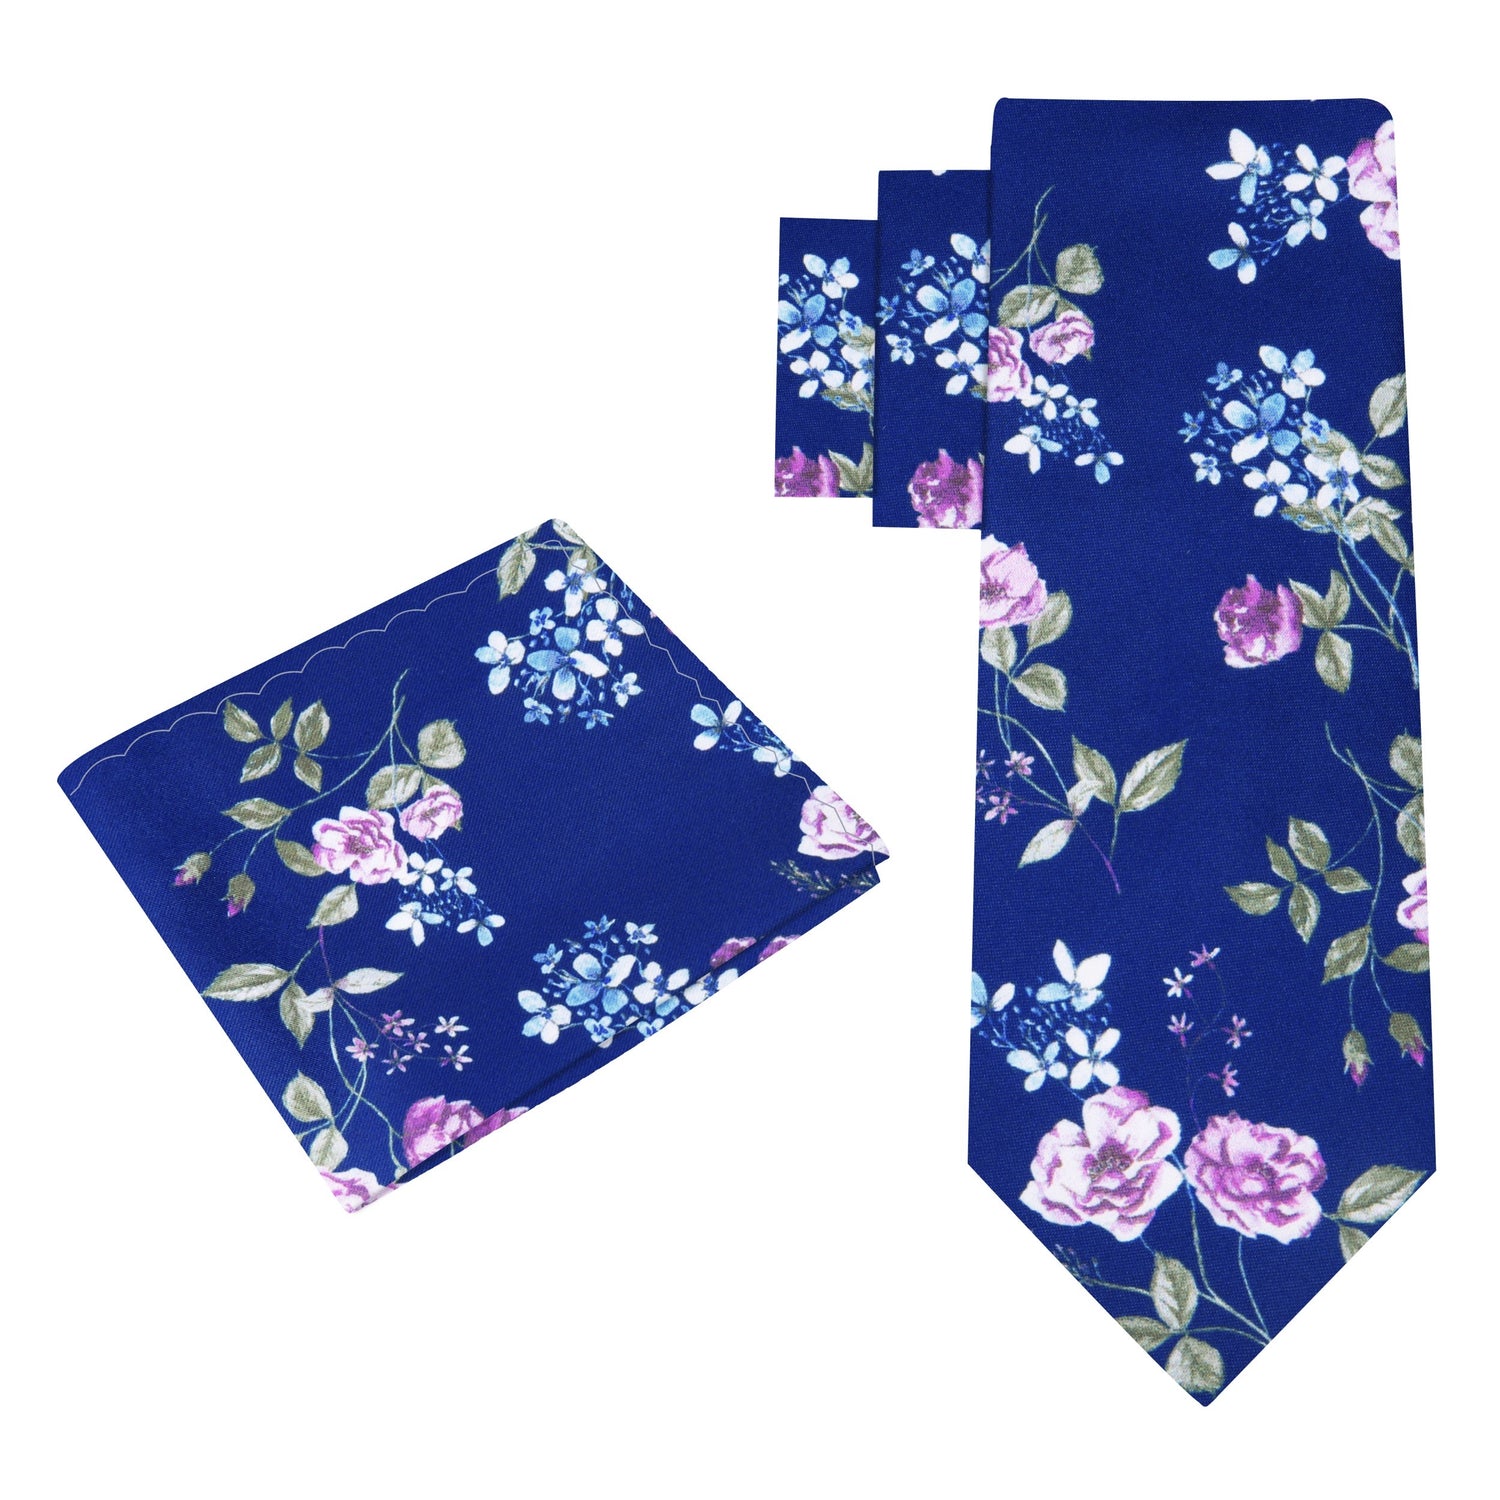 Alt View: Blue, Green, White Flowers Necktie and Matching Square